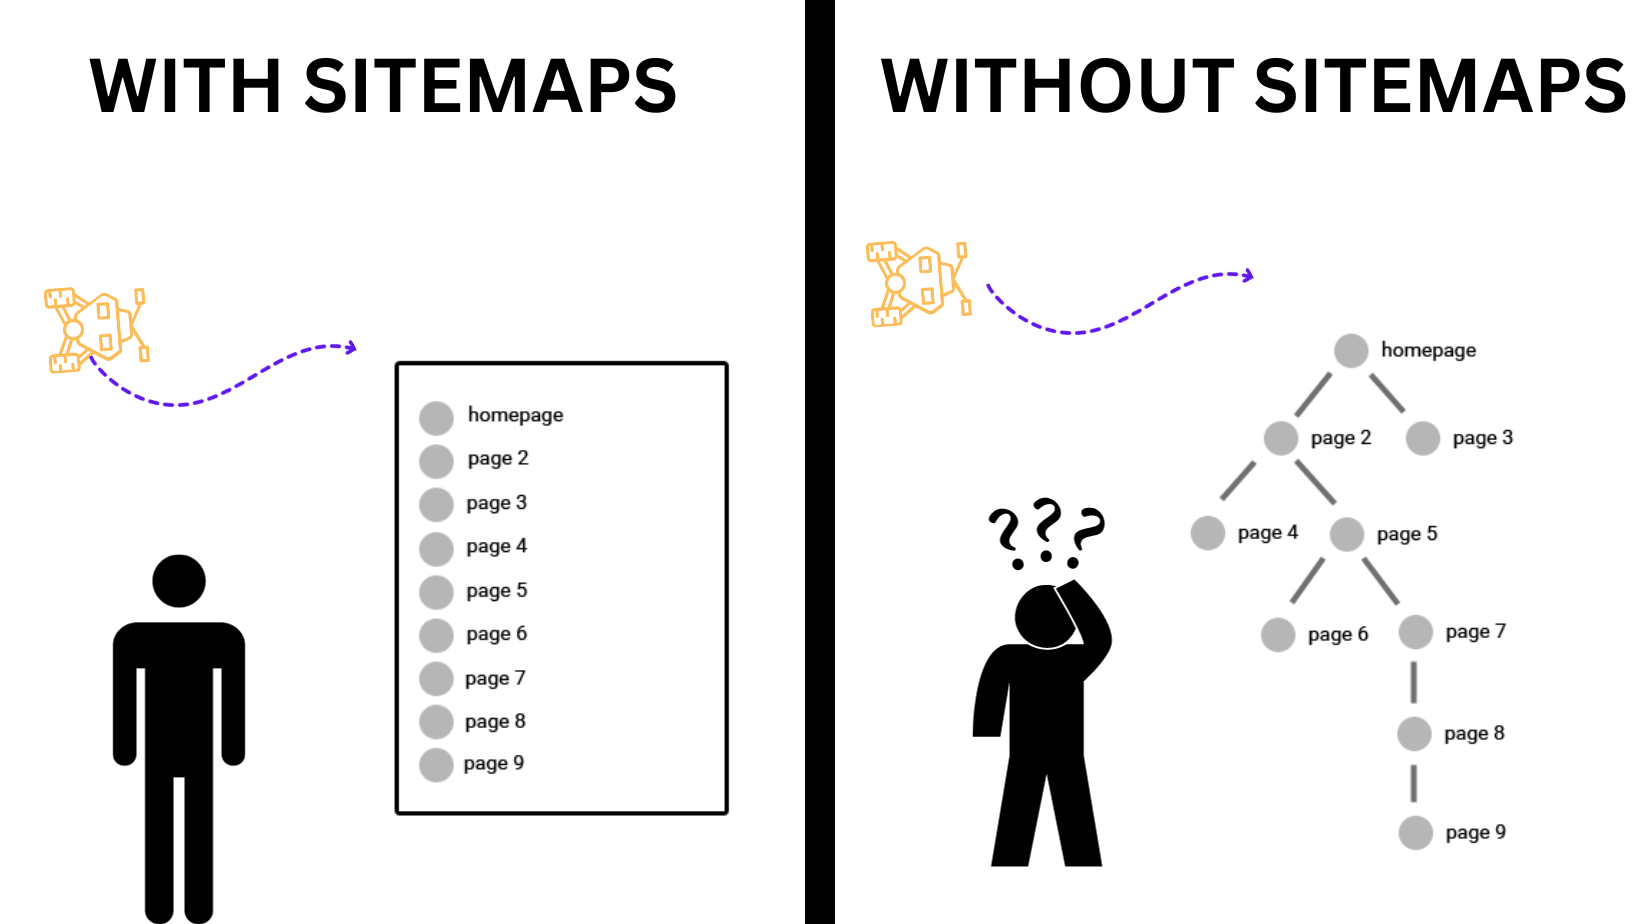 WHY DO WE NEED SITEMAP